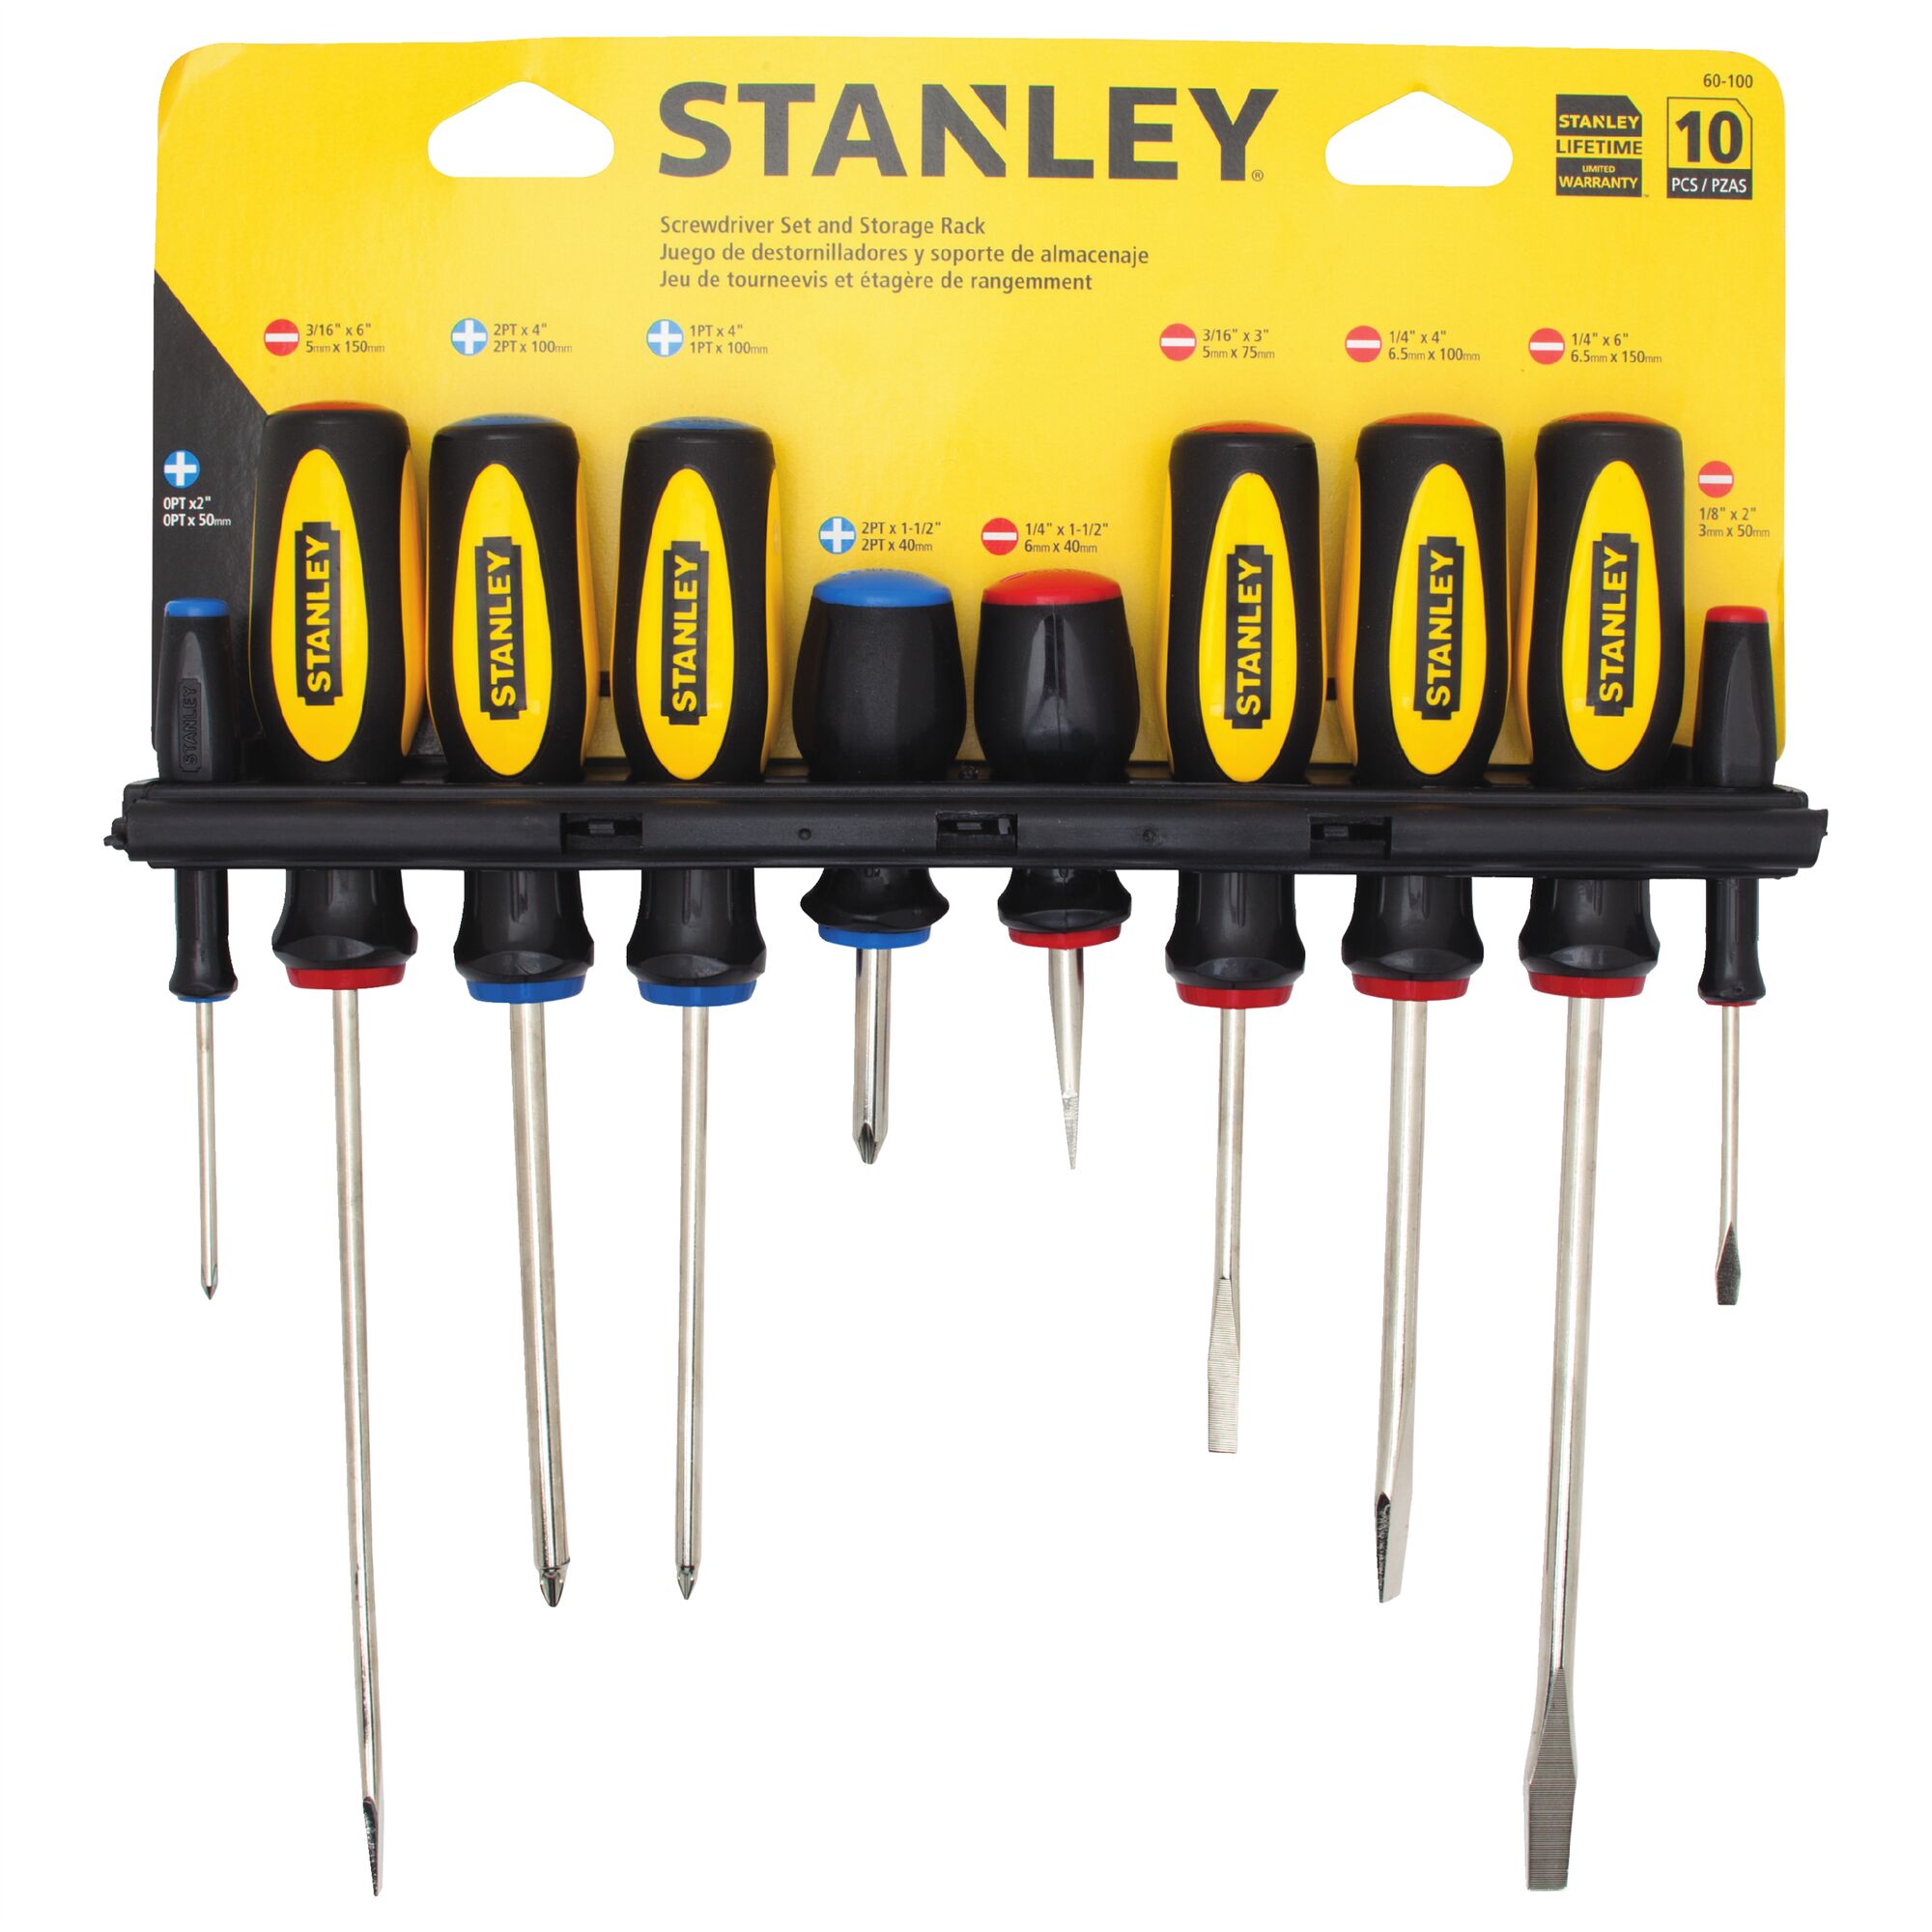 Stanley Tools 10-Piece Standard Fluted Screwdriver Set Phillips/Slotted 60100 